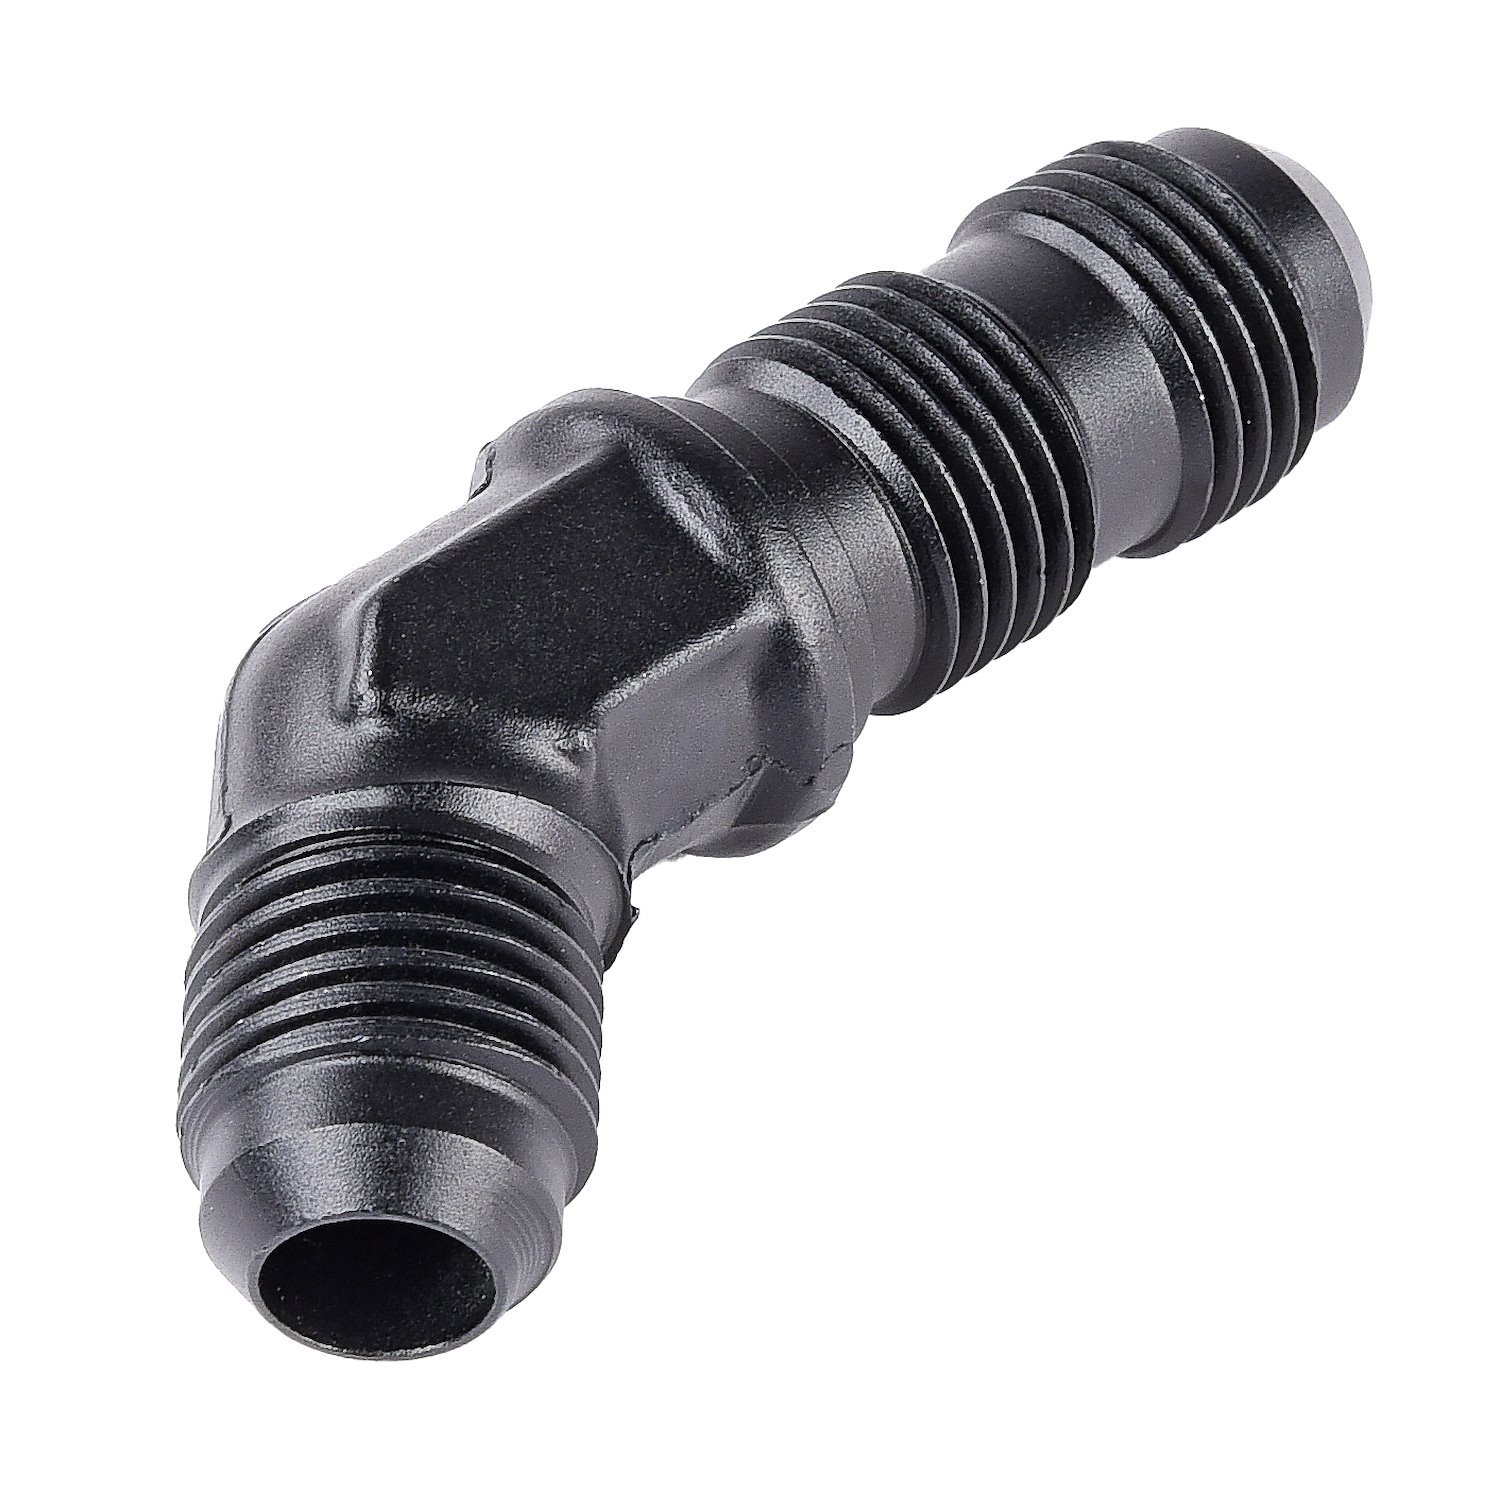 AN to AN 45-Degree Bulkhead Adapter Fitting [-6 AN Male to -6 AN Male, Black]